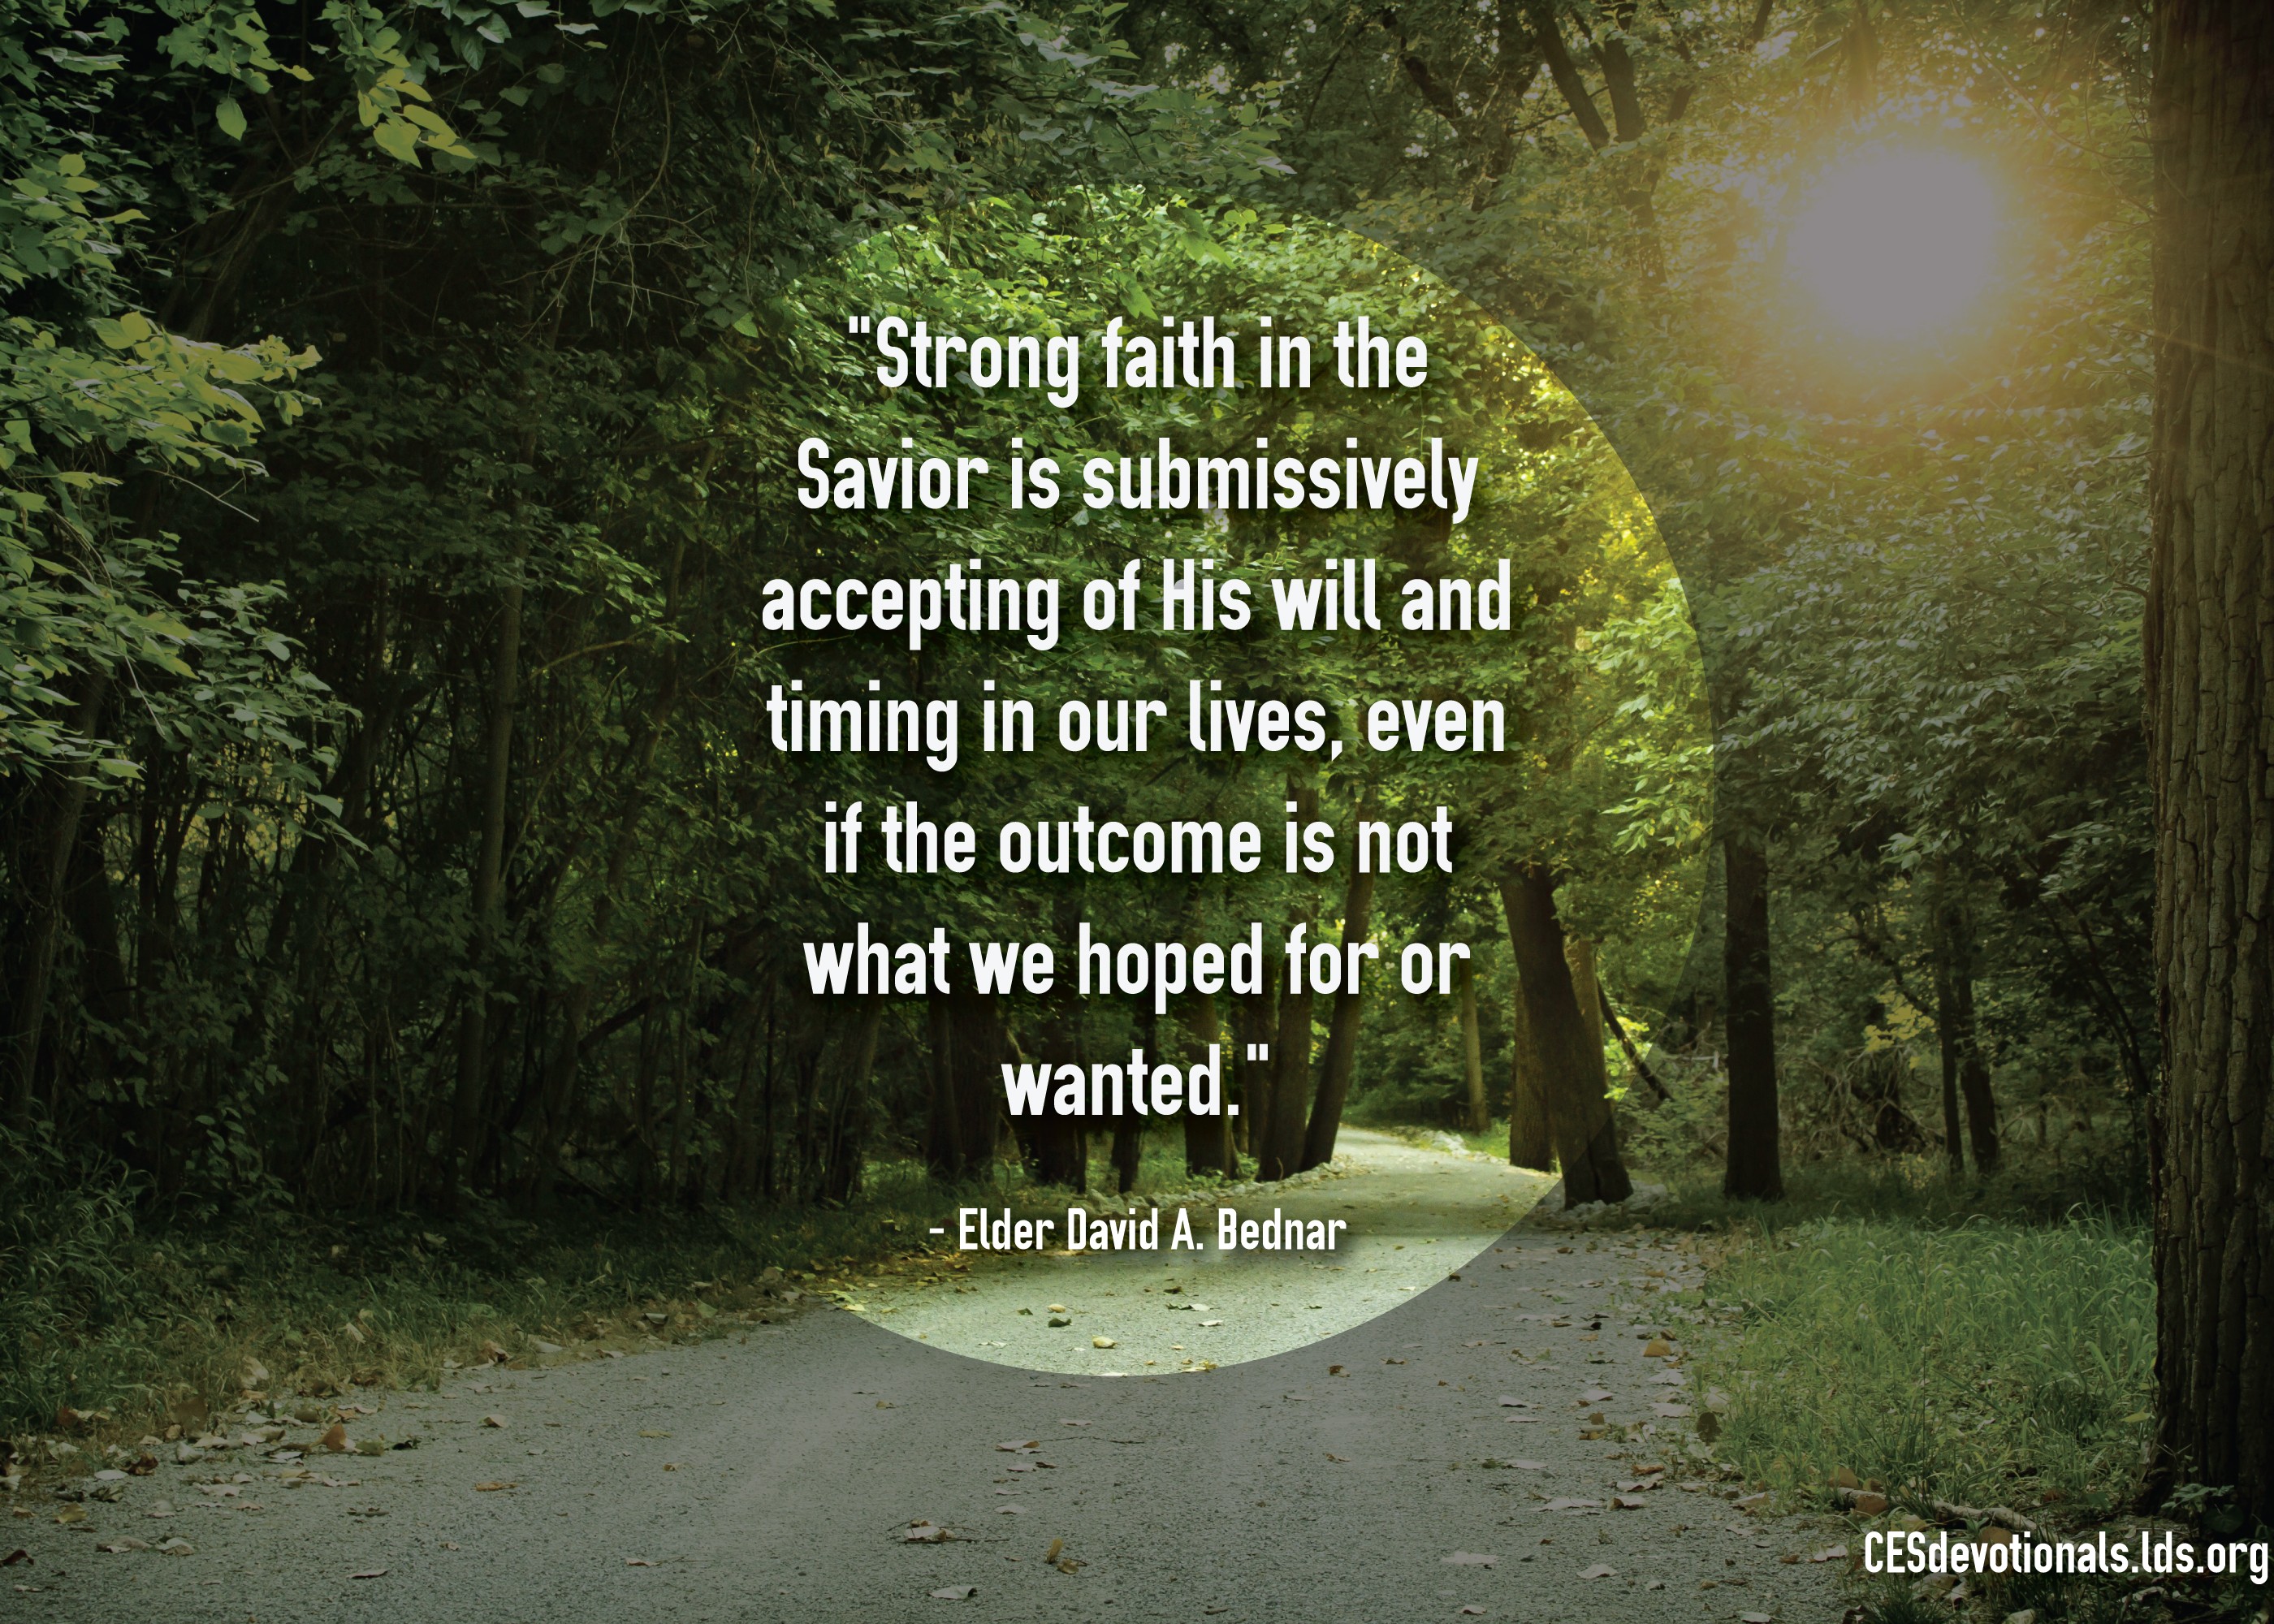 An image of a path through the woods, combined with a quote by Elder David A. Bednar: “Strong faith in the Savior is … accepting of His will.”